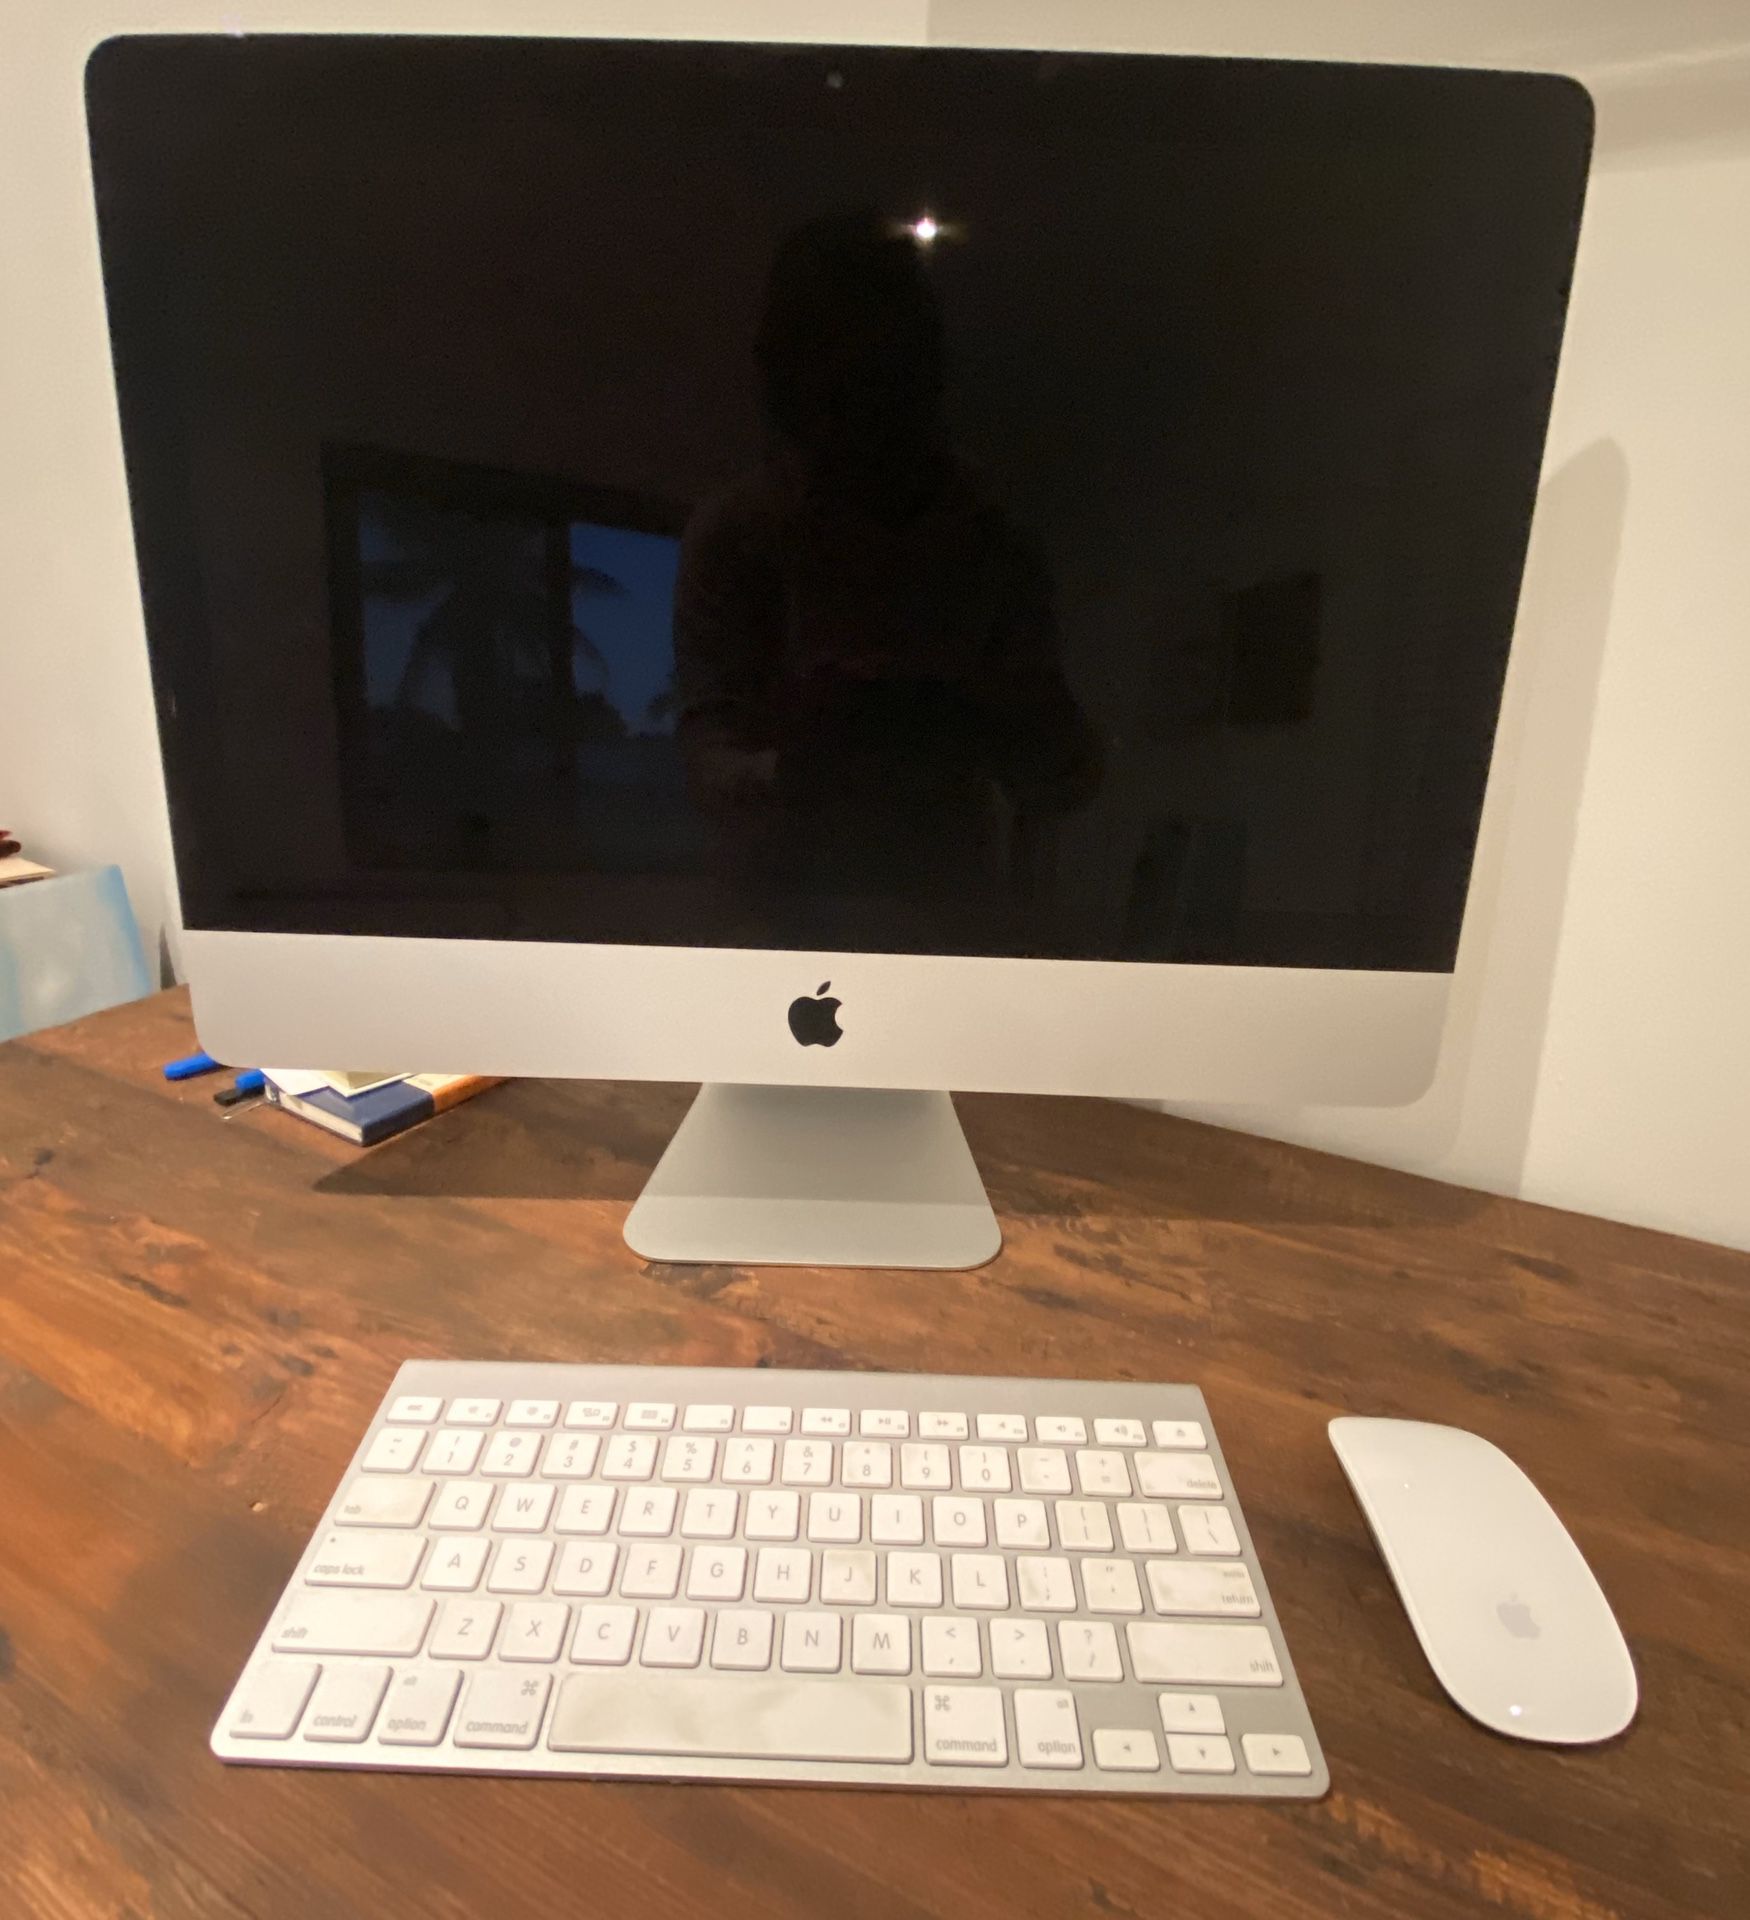 iMac 21.5 Inch (mid-2014) with Wireless Keyboard and Mouse